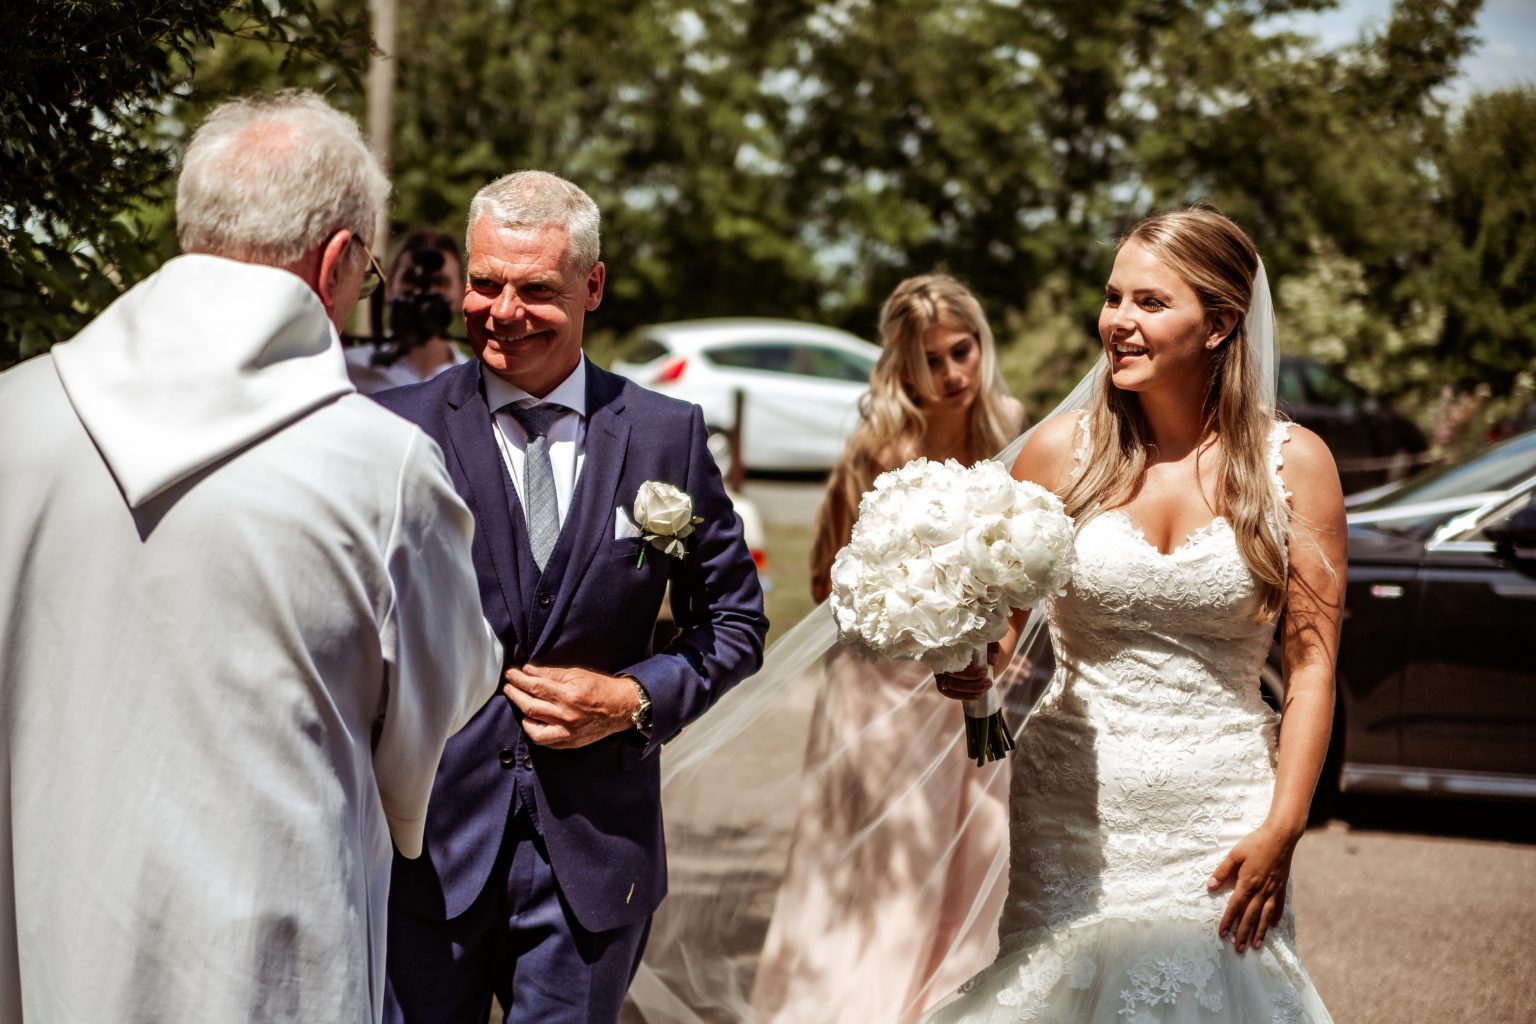 Cotswolds Wedding Photographer – Elegant country marquee wedding in Ongar, Essex at the Church of St Germain, Bobbingworth – Essex wedding photographer	